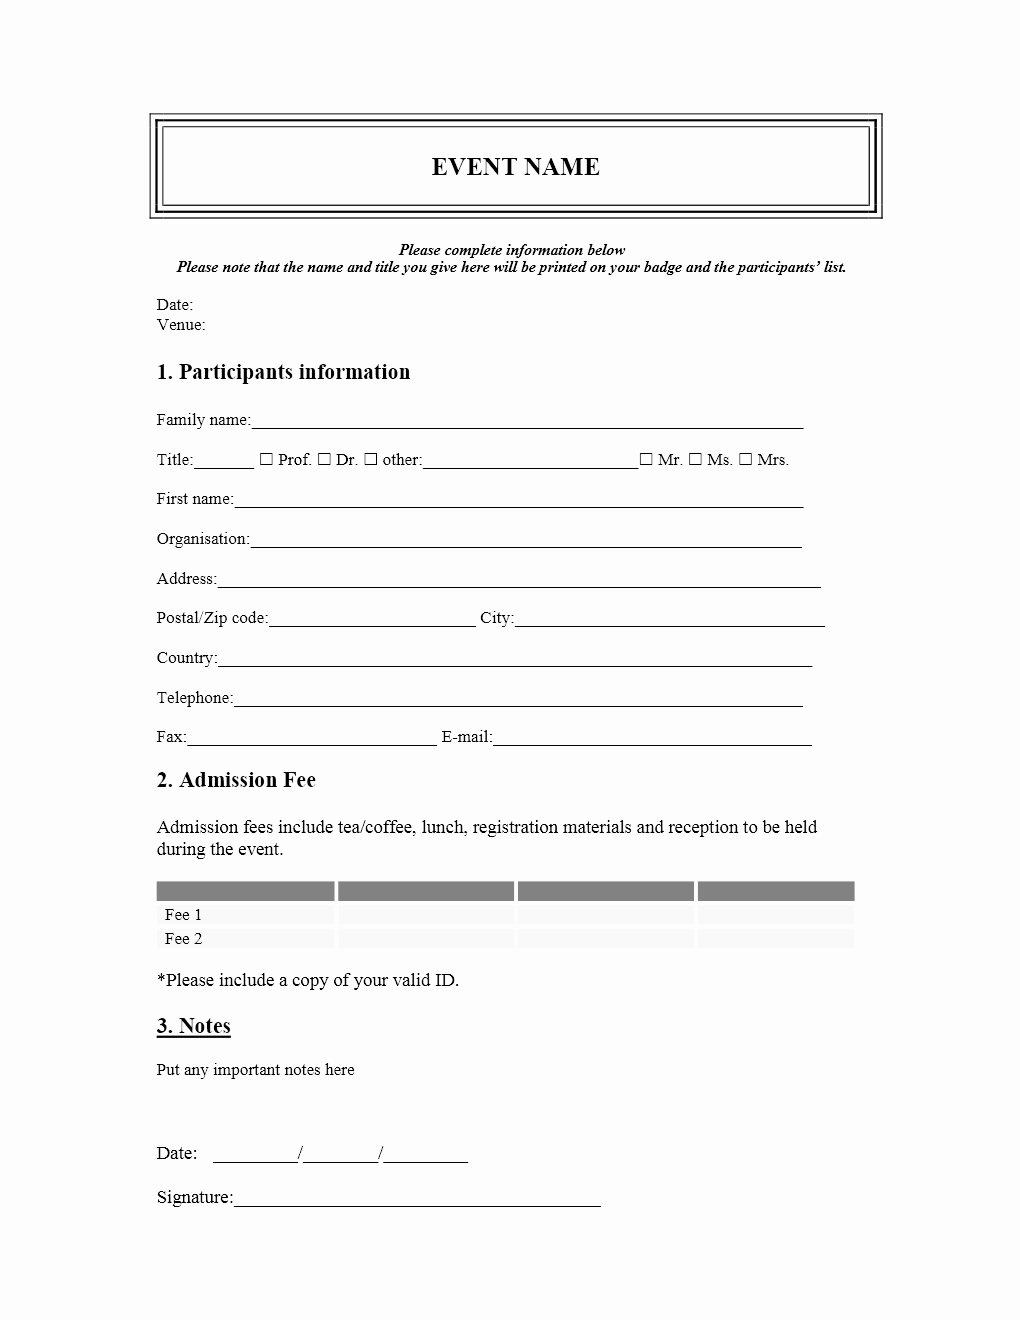 Event Registration form Template Word Best Of event Registration form